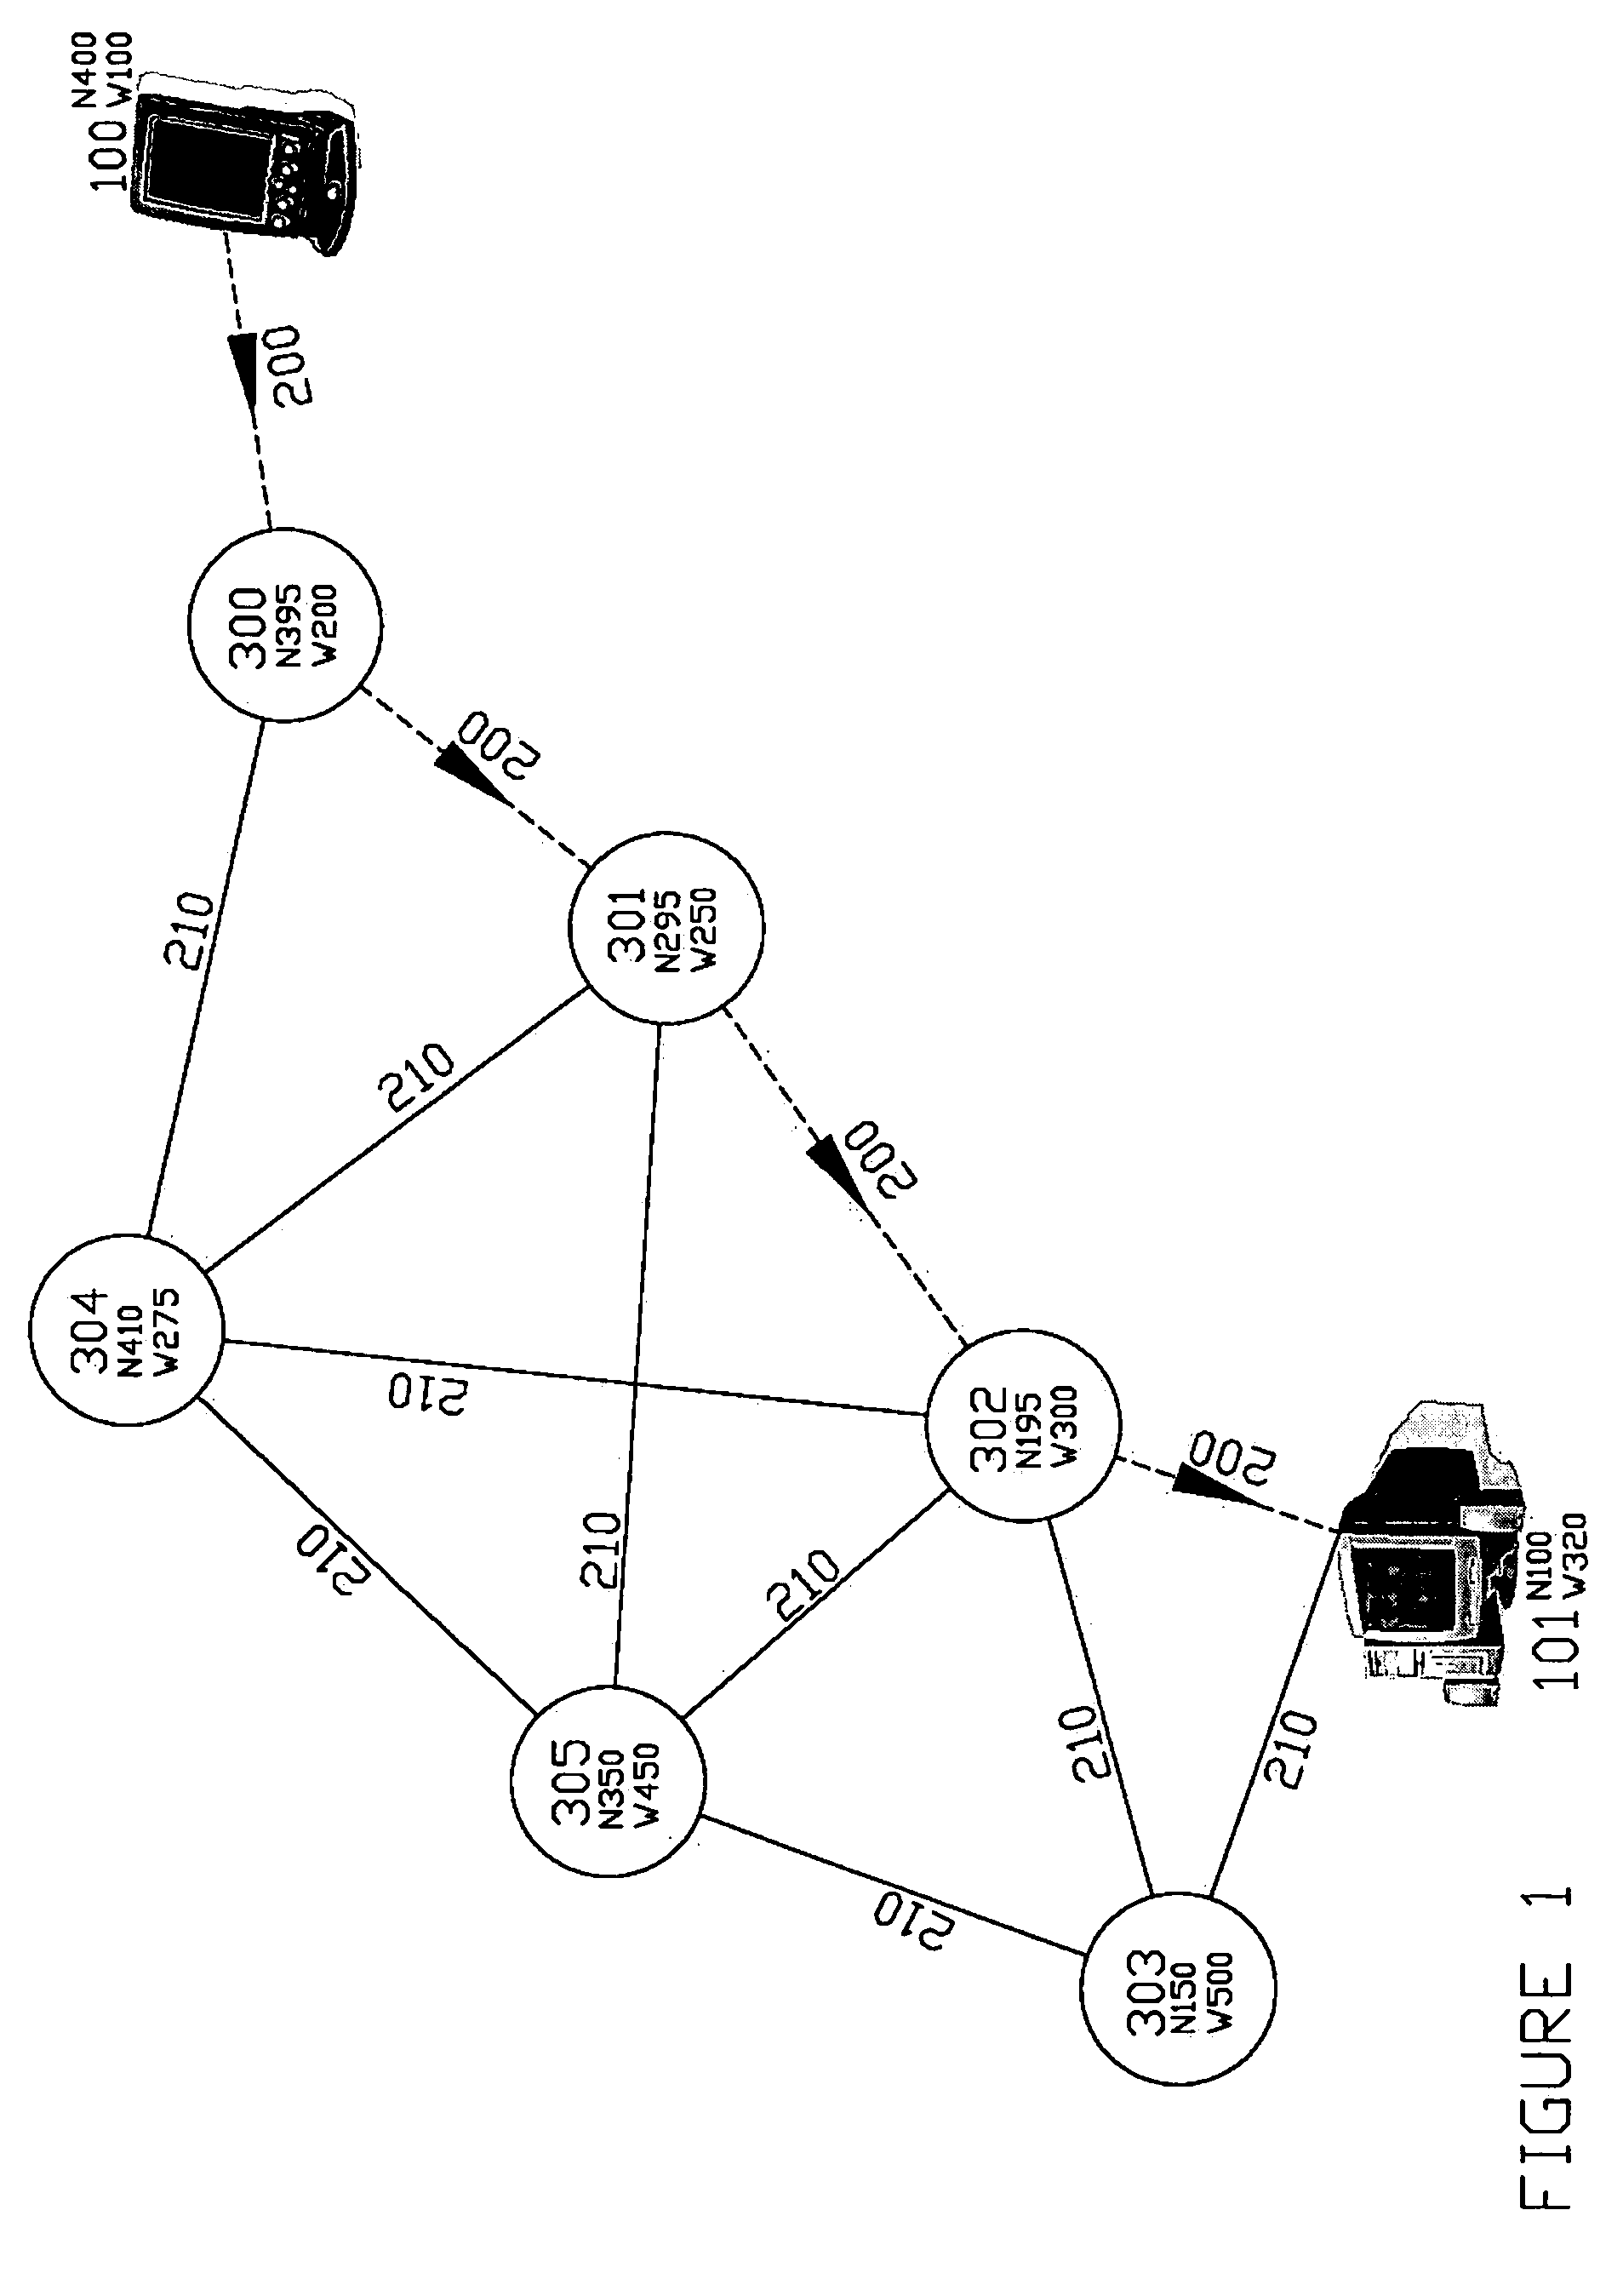 Method for routing data packets using an IP address based on geo position